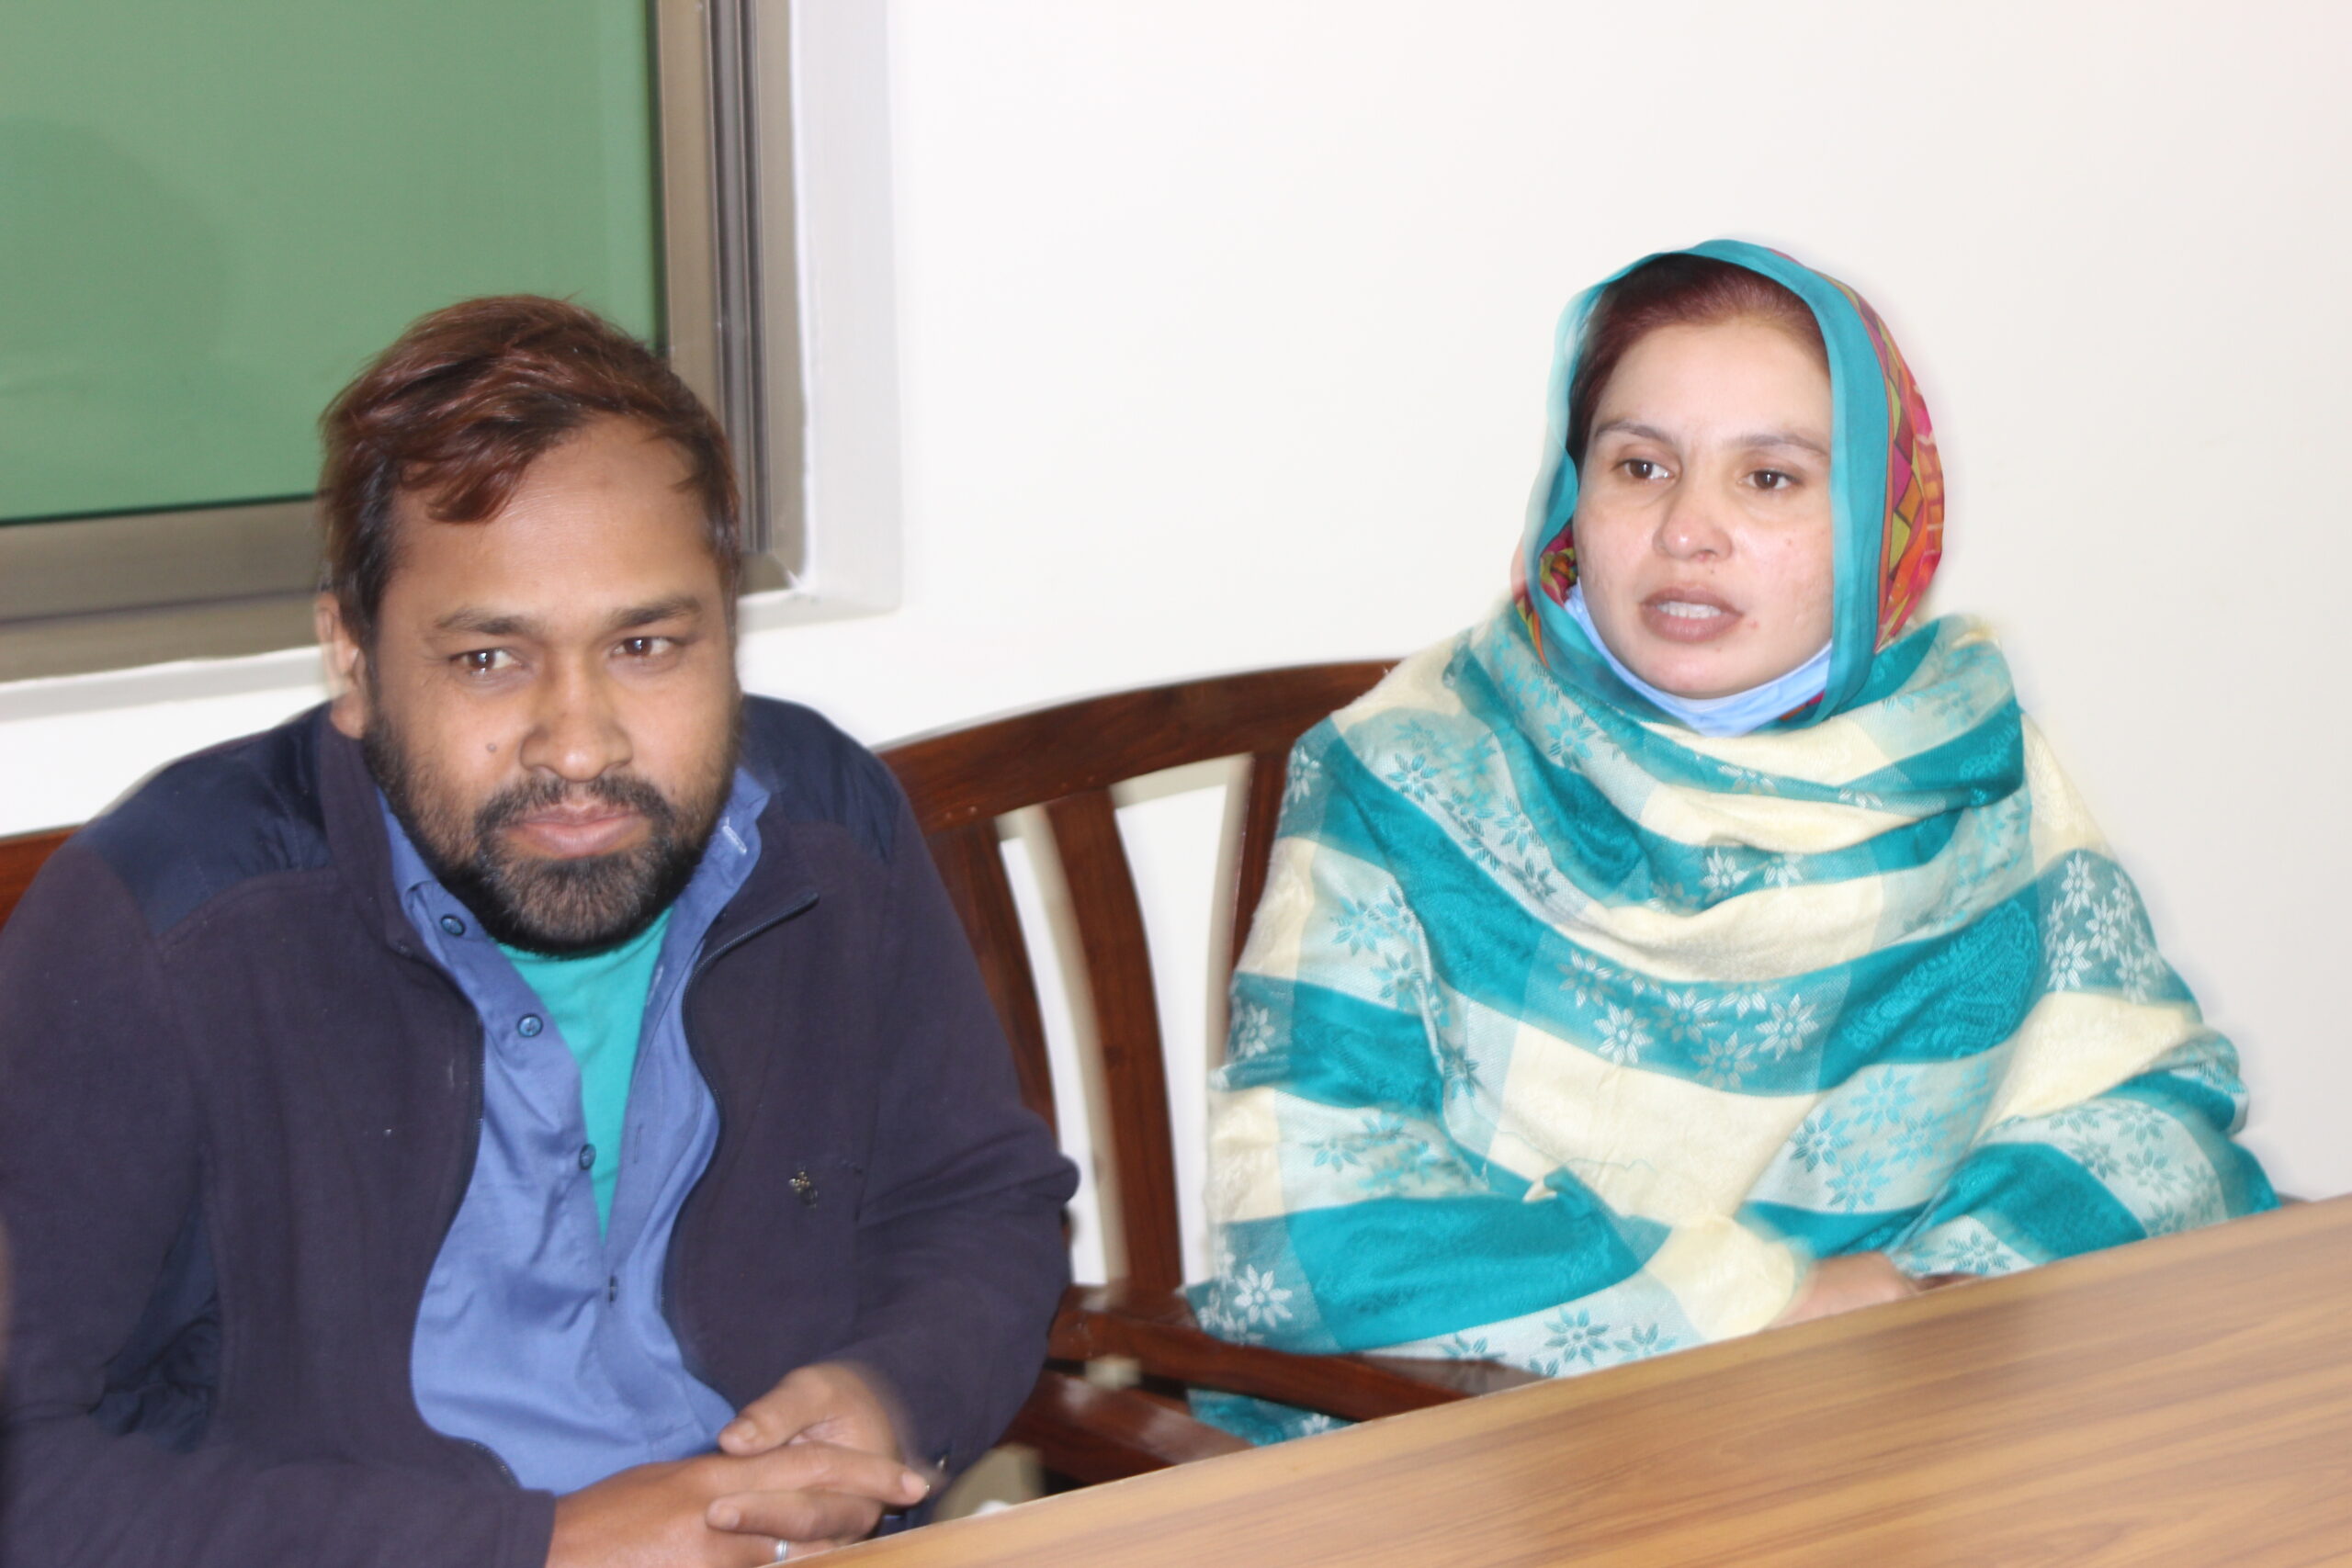 PAKISTAN | APR. 21, 2021 — Woman Working to Provide for Family Pressured to Convert to Islam